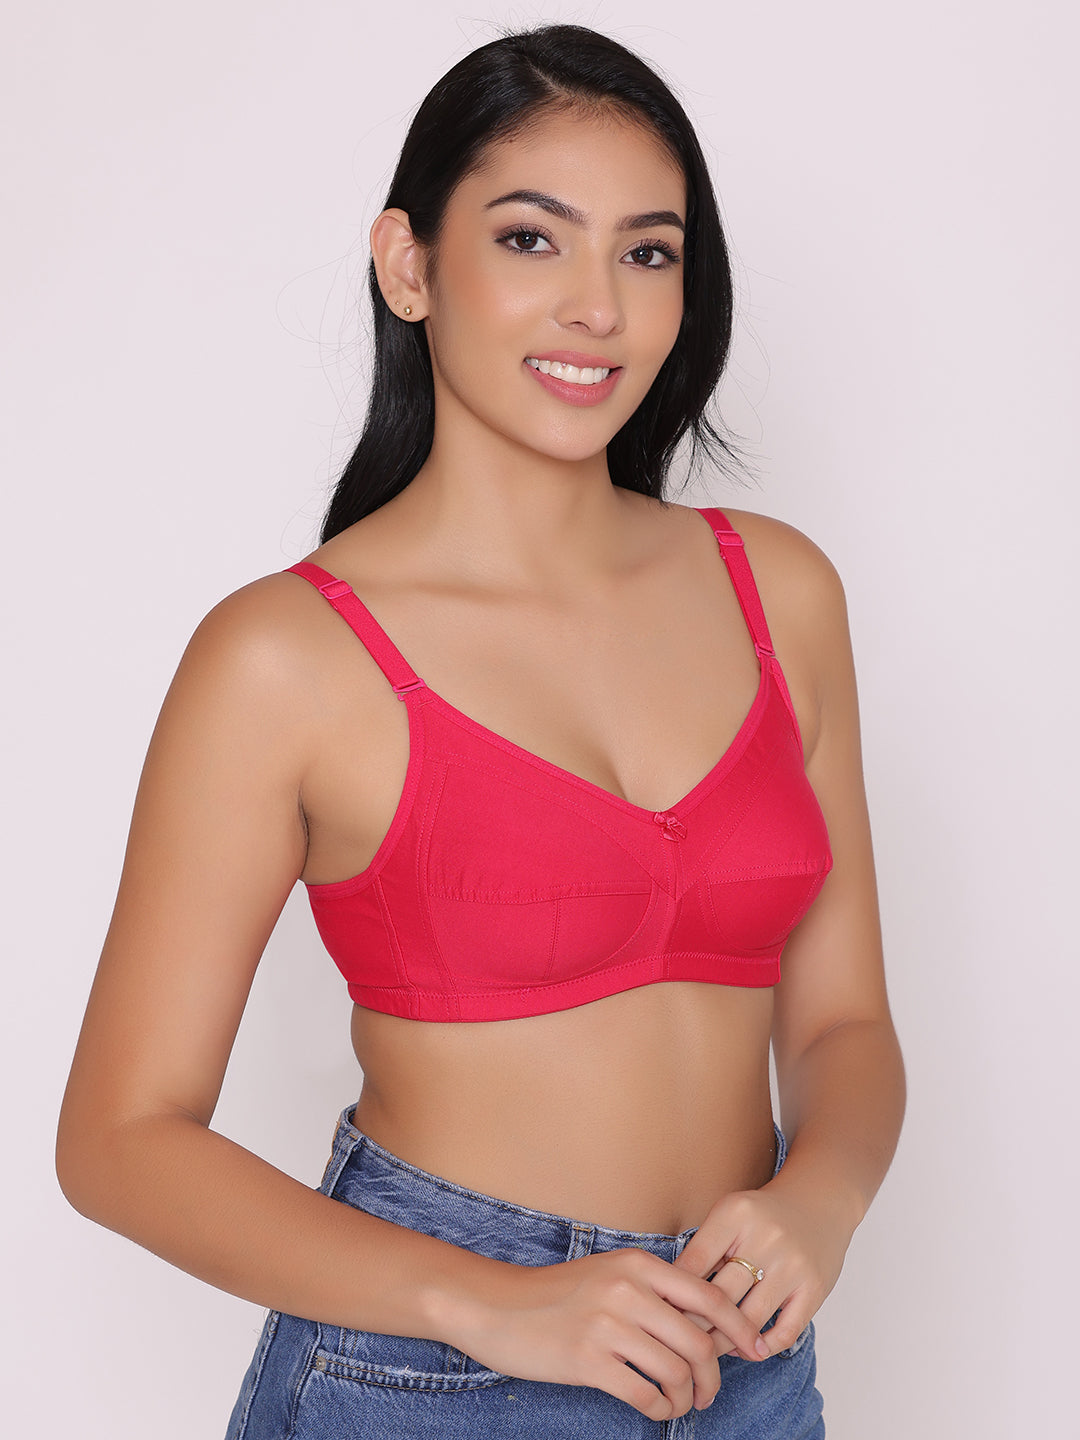 Buy INKURV Full Coverage Bra for Women with Cotton Blend Fabric for High  Support-Combo of 2, BLS,Pk